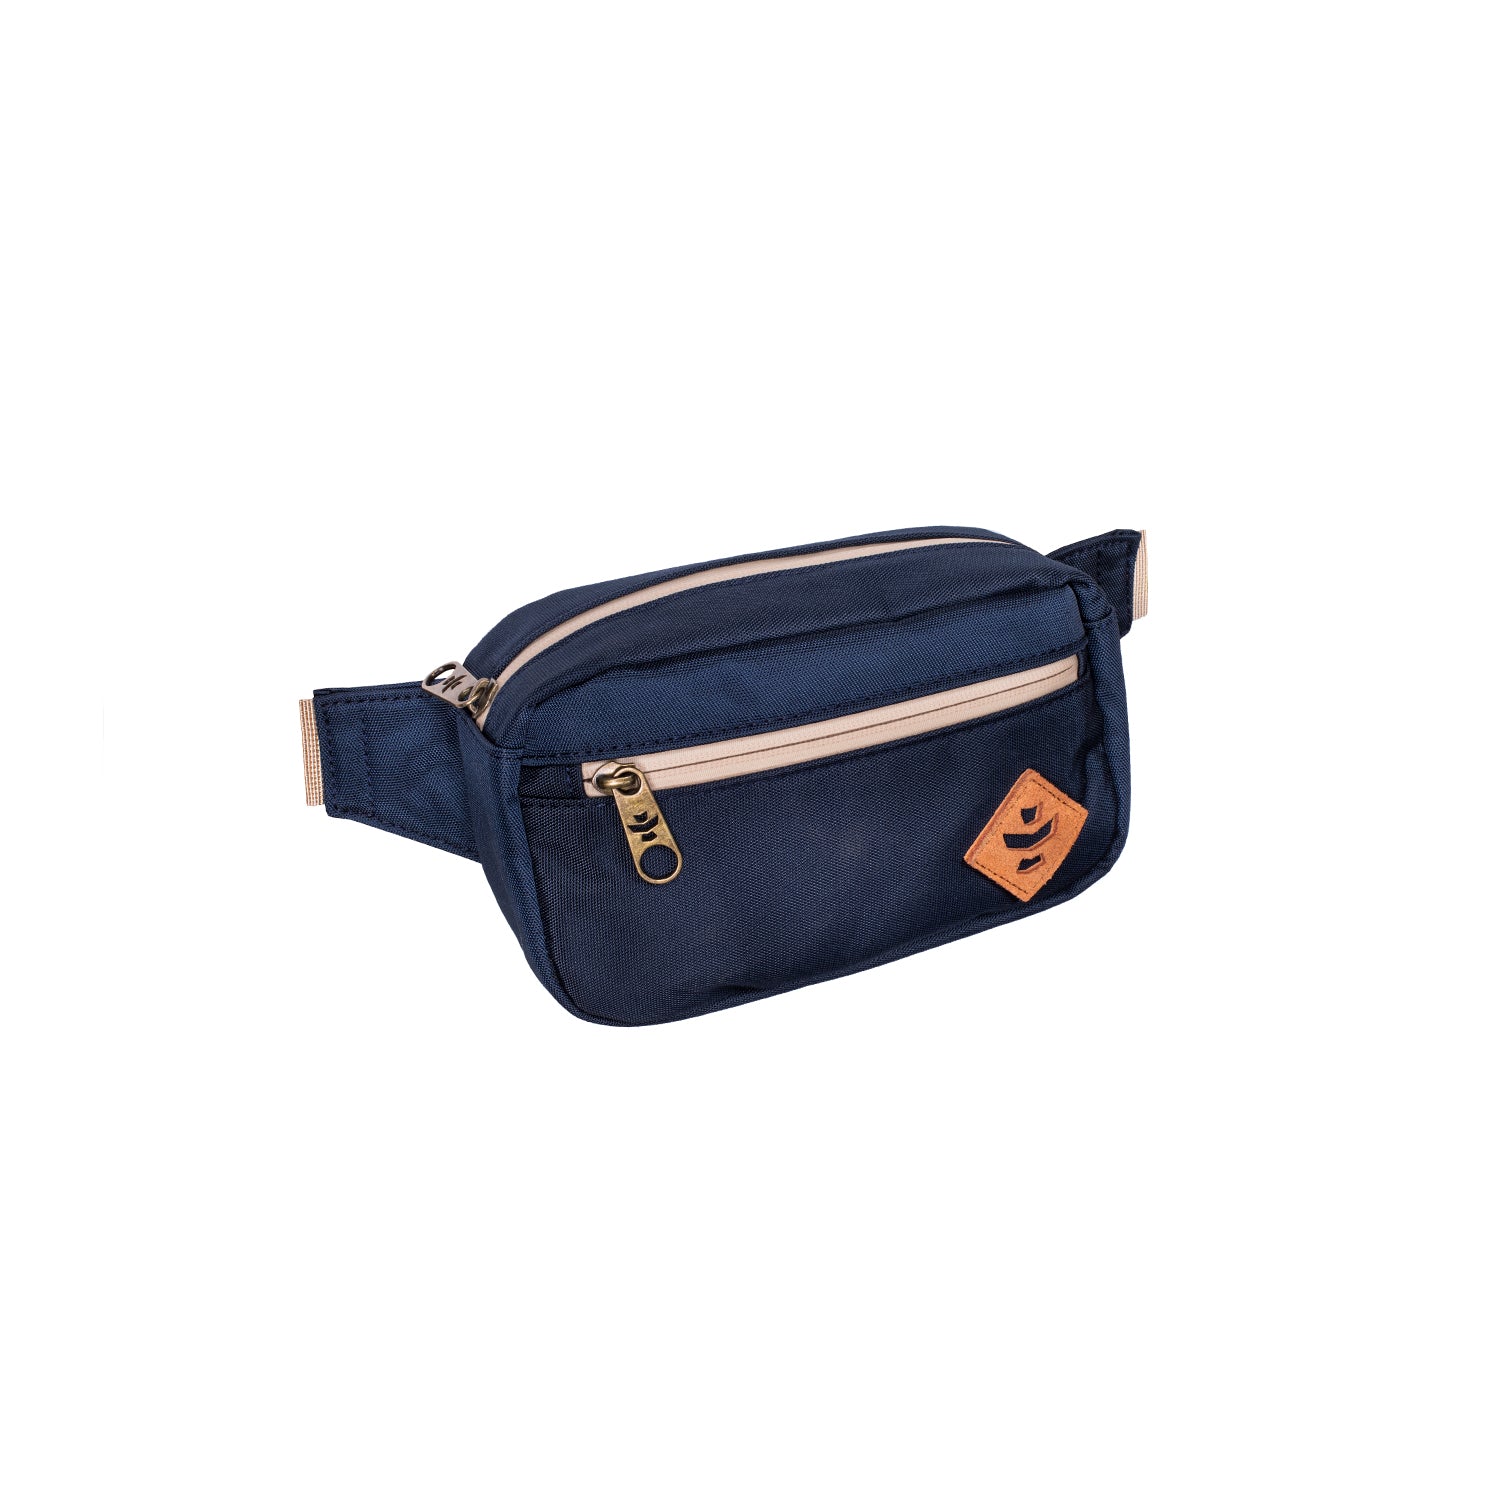 Navy Blue Nylon Smell Proof Water Resistant Crossbody Bag